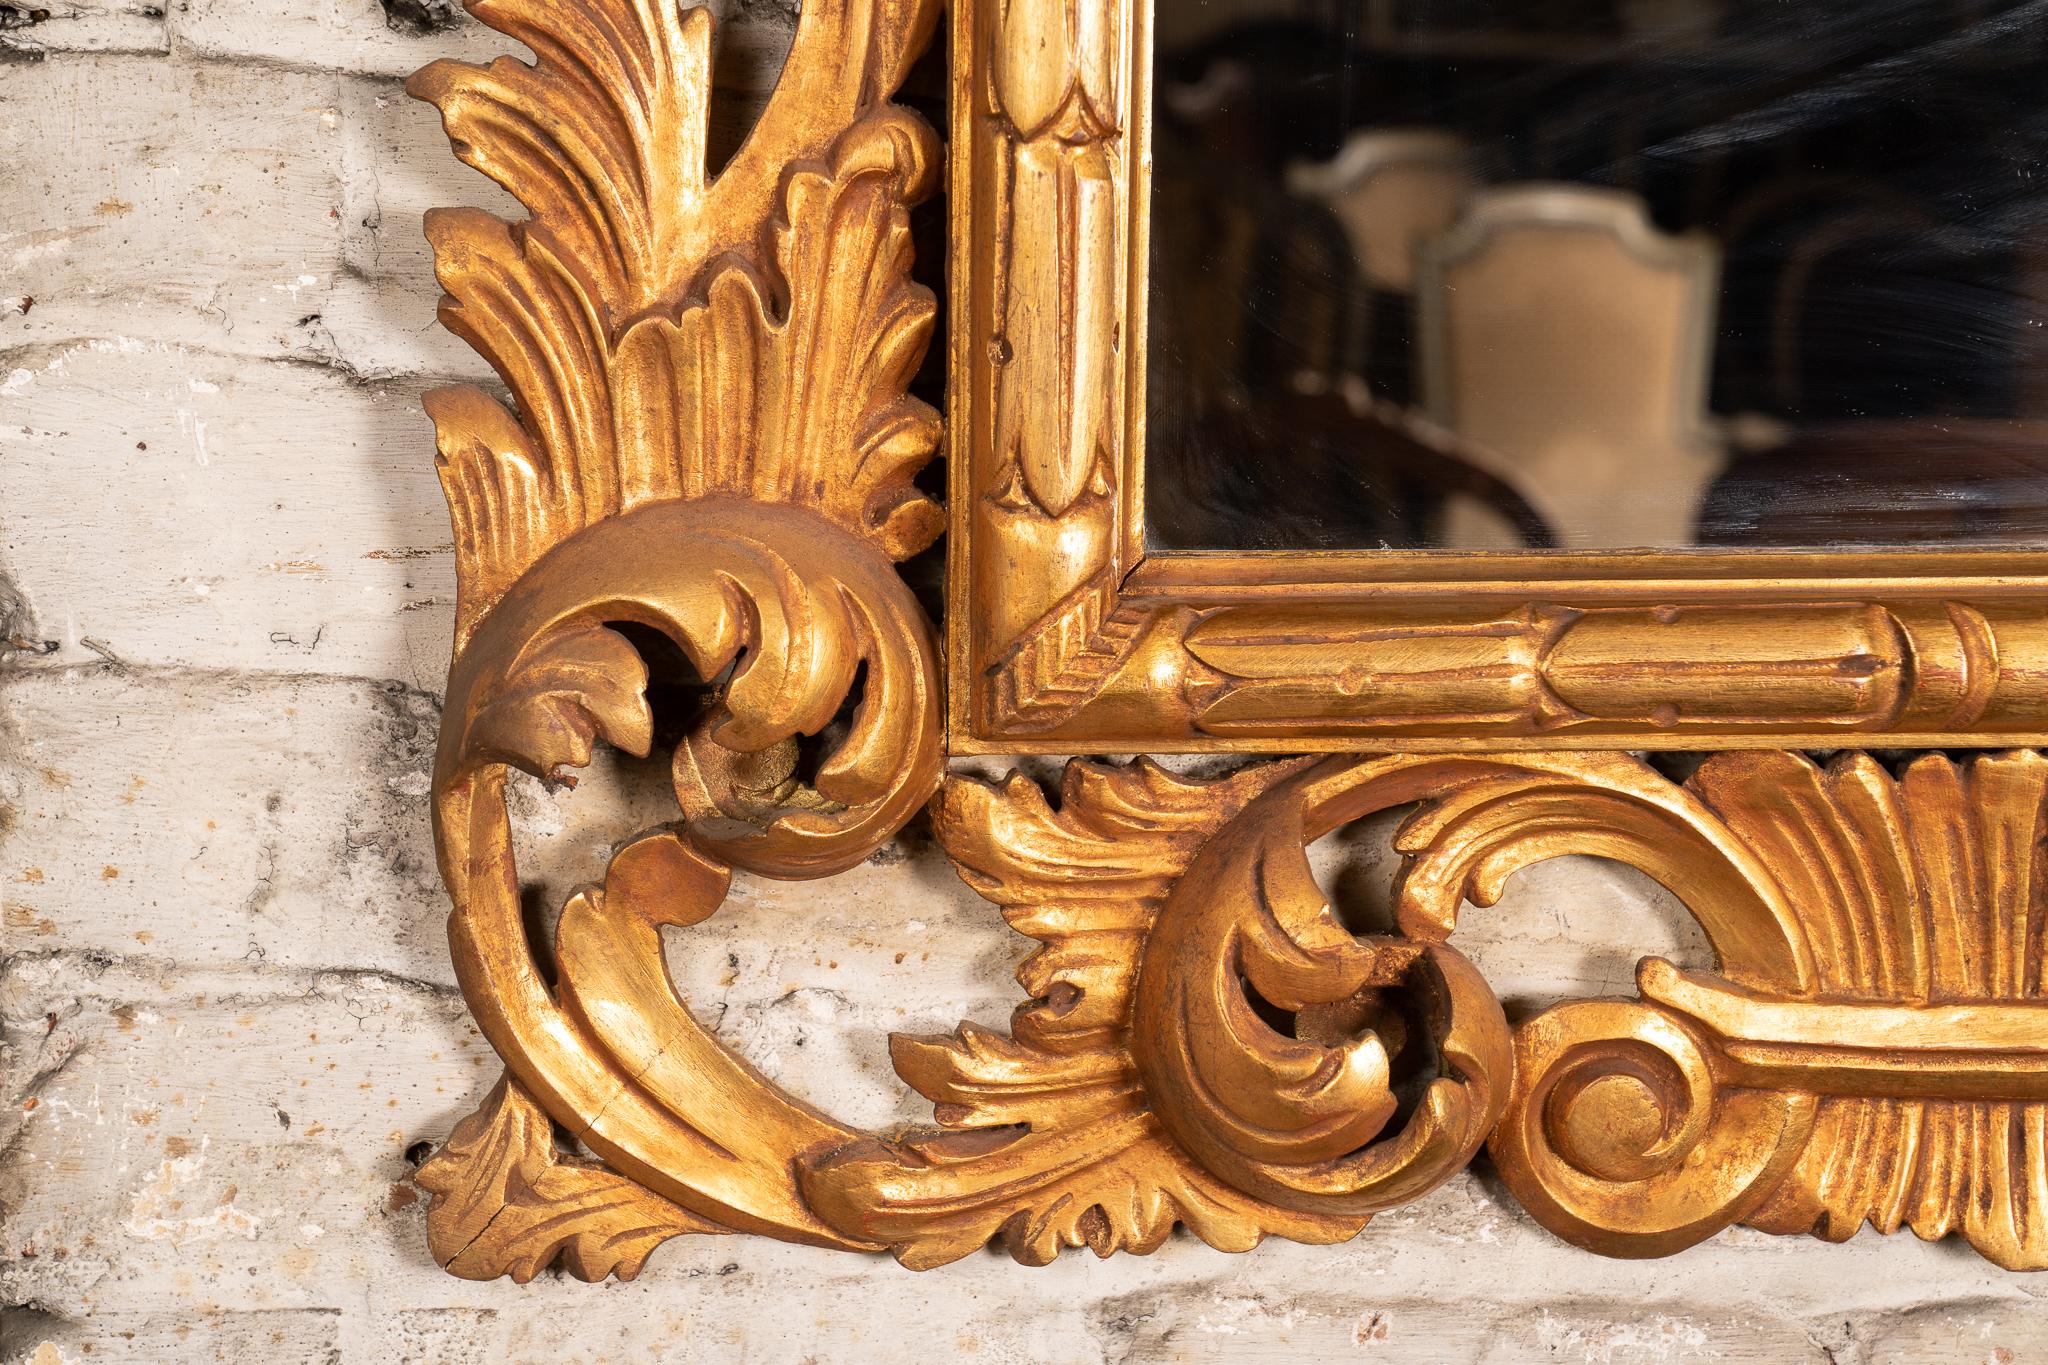 This Italian Roccoco style mirror features ornate, heavy carvings and is painted with gold leaf throughout. The 20th century gilt wood mirror has a simply patterned inner frame, which is surrounded by scrolling acanthus leaves mirroring the shape of